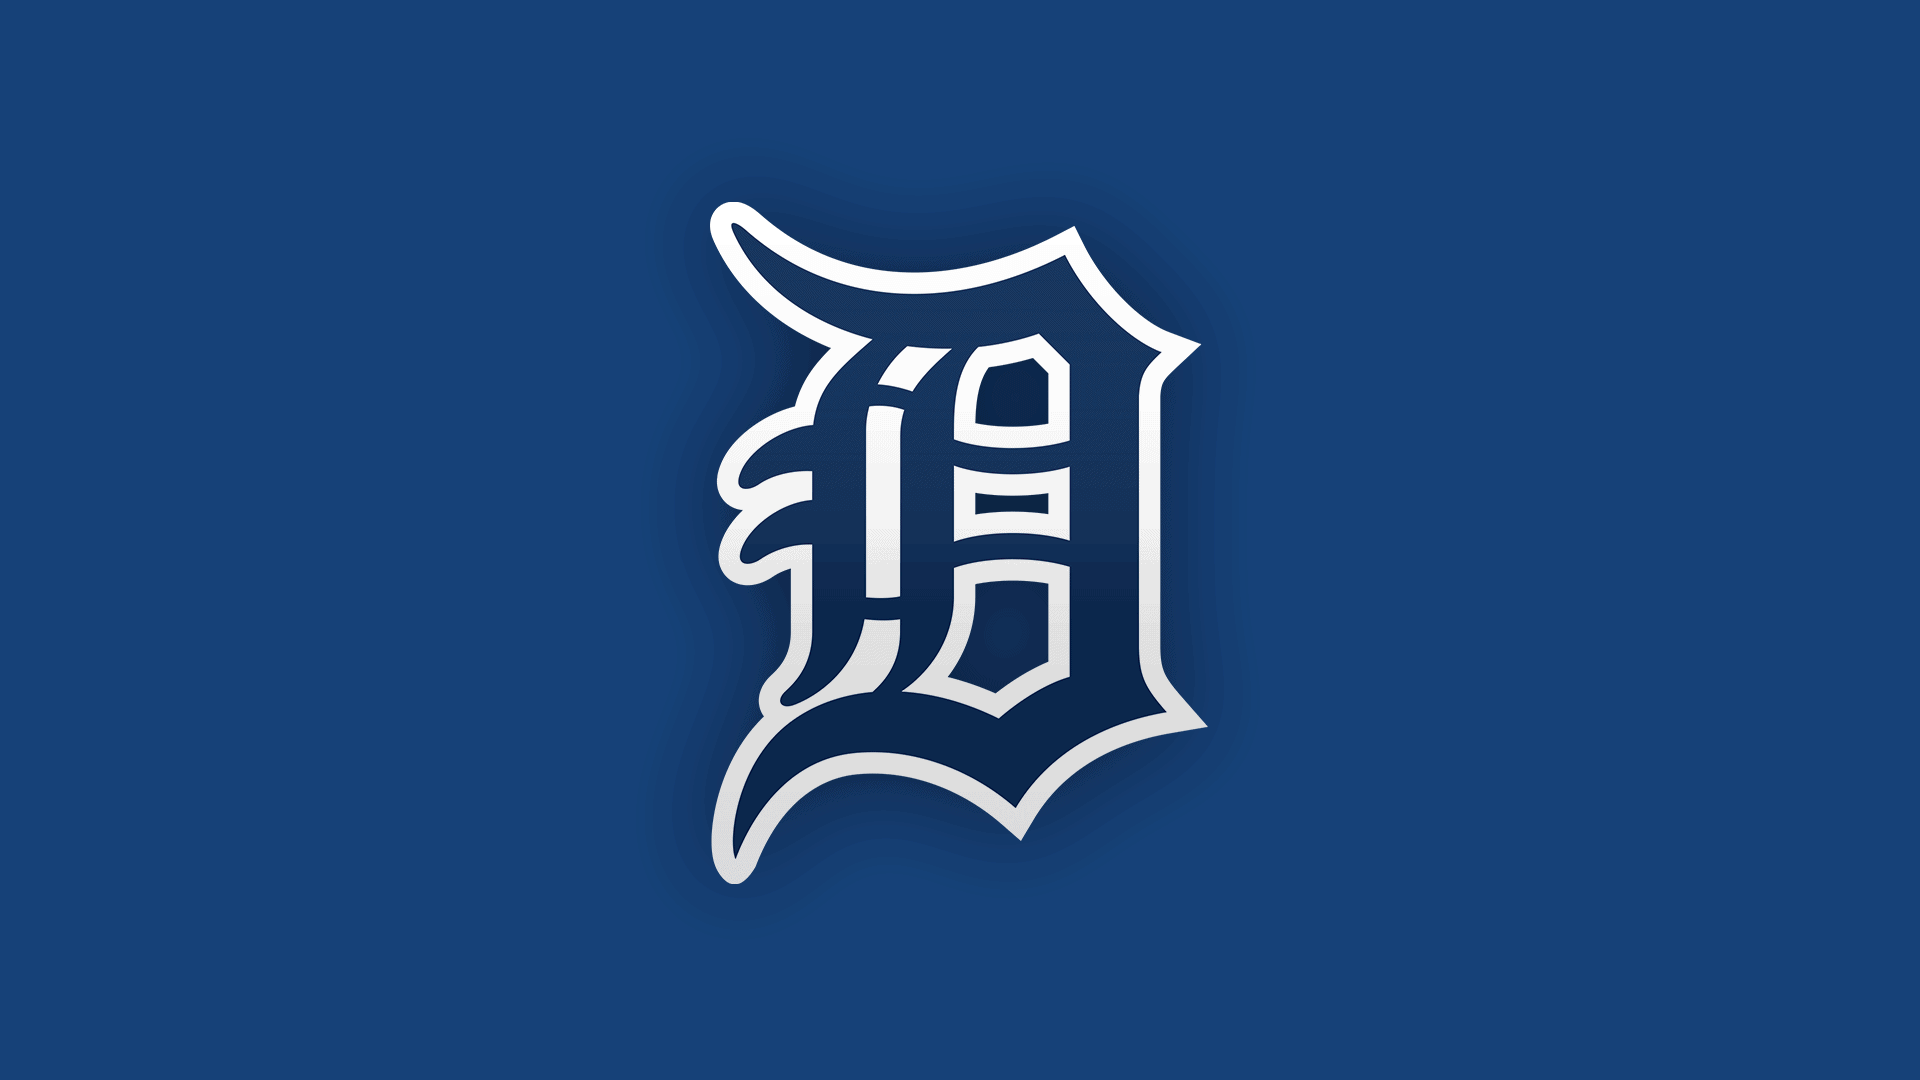 Detroit Tigers Odds Beer Girl Joey Wentz Tyler Holton Luis Santana Tim Naughton Rich Hill Joe Rizzo Miami Marlins Blair Calvo Detroit Tigers Top Prospects Tyler Nevin Riley Greene Spencer Torkelson Isan Diaz Detroit Tigers to call up Sawyer Gibson-Long